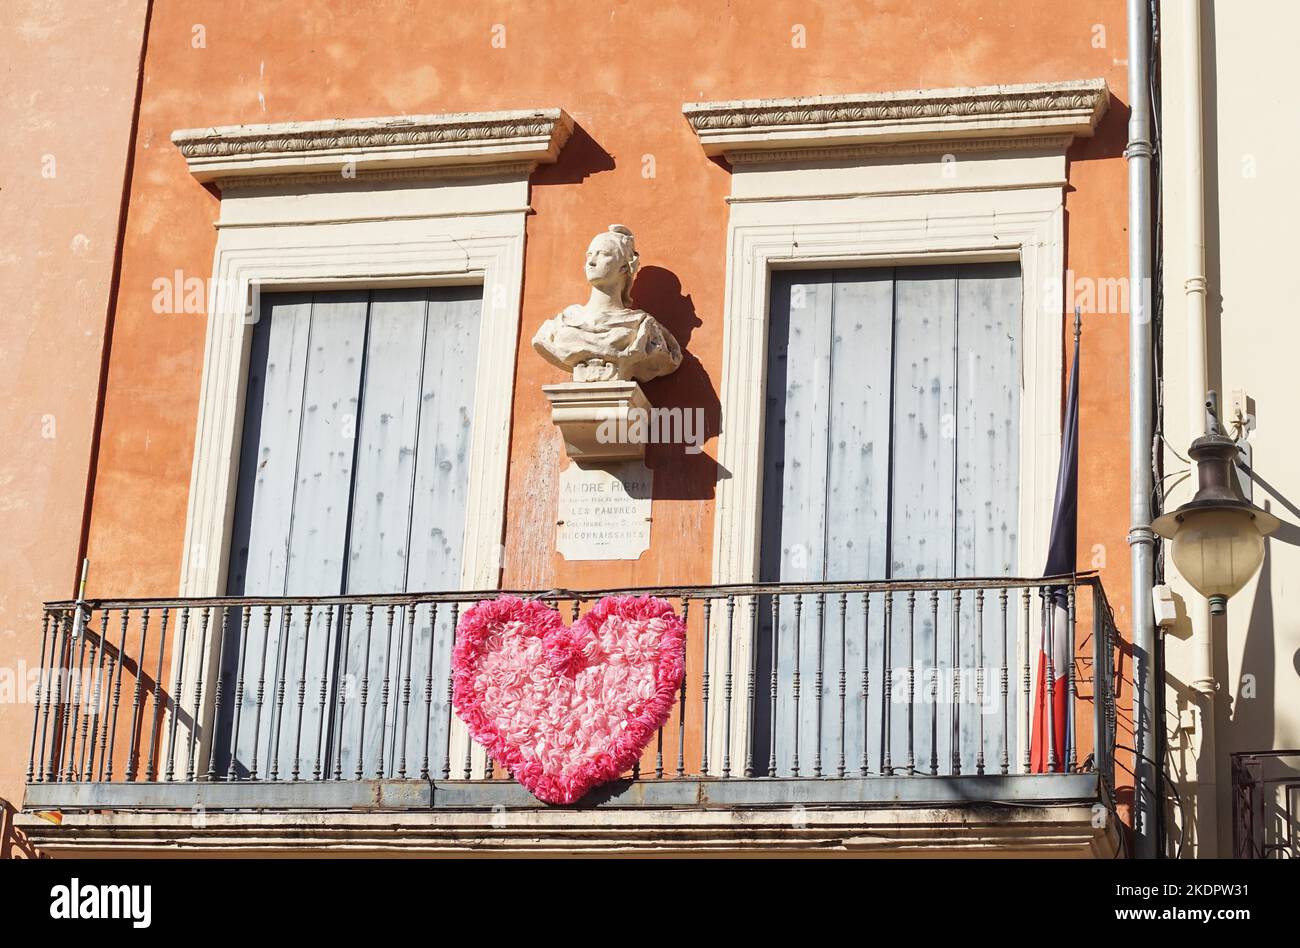 Collioure, France - October 2022: House front balcony featuring bust and plaque commemorating Andre Riera (1744-1836) Stock Photo